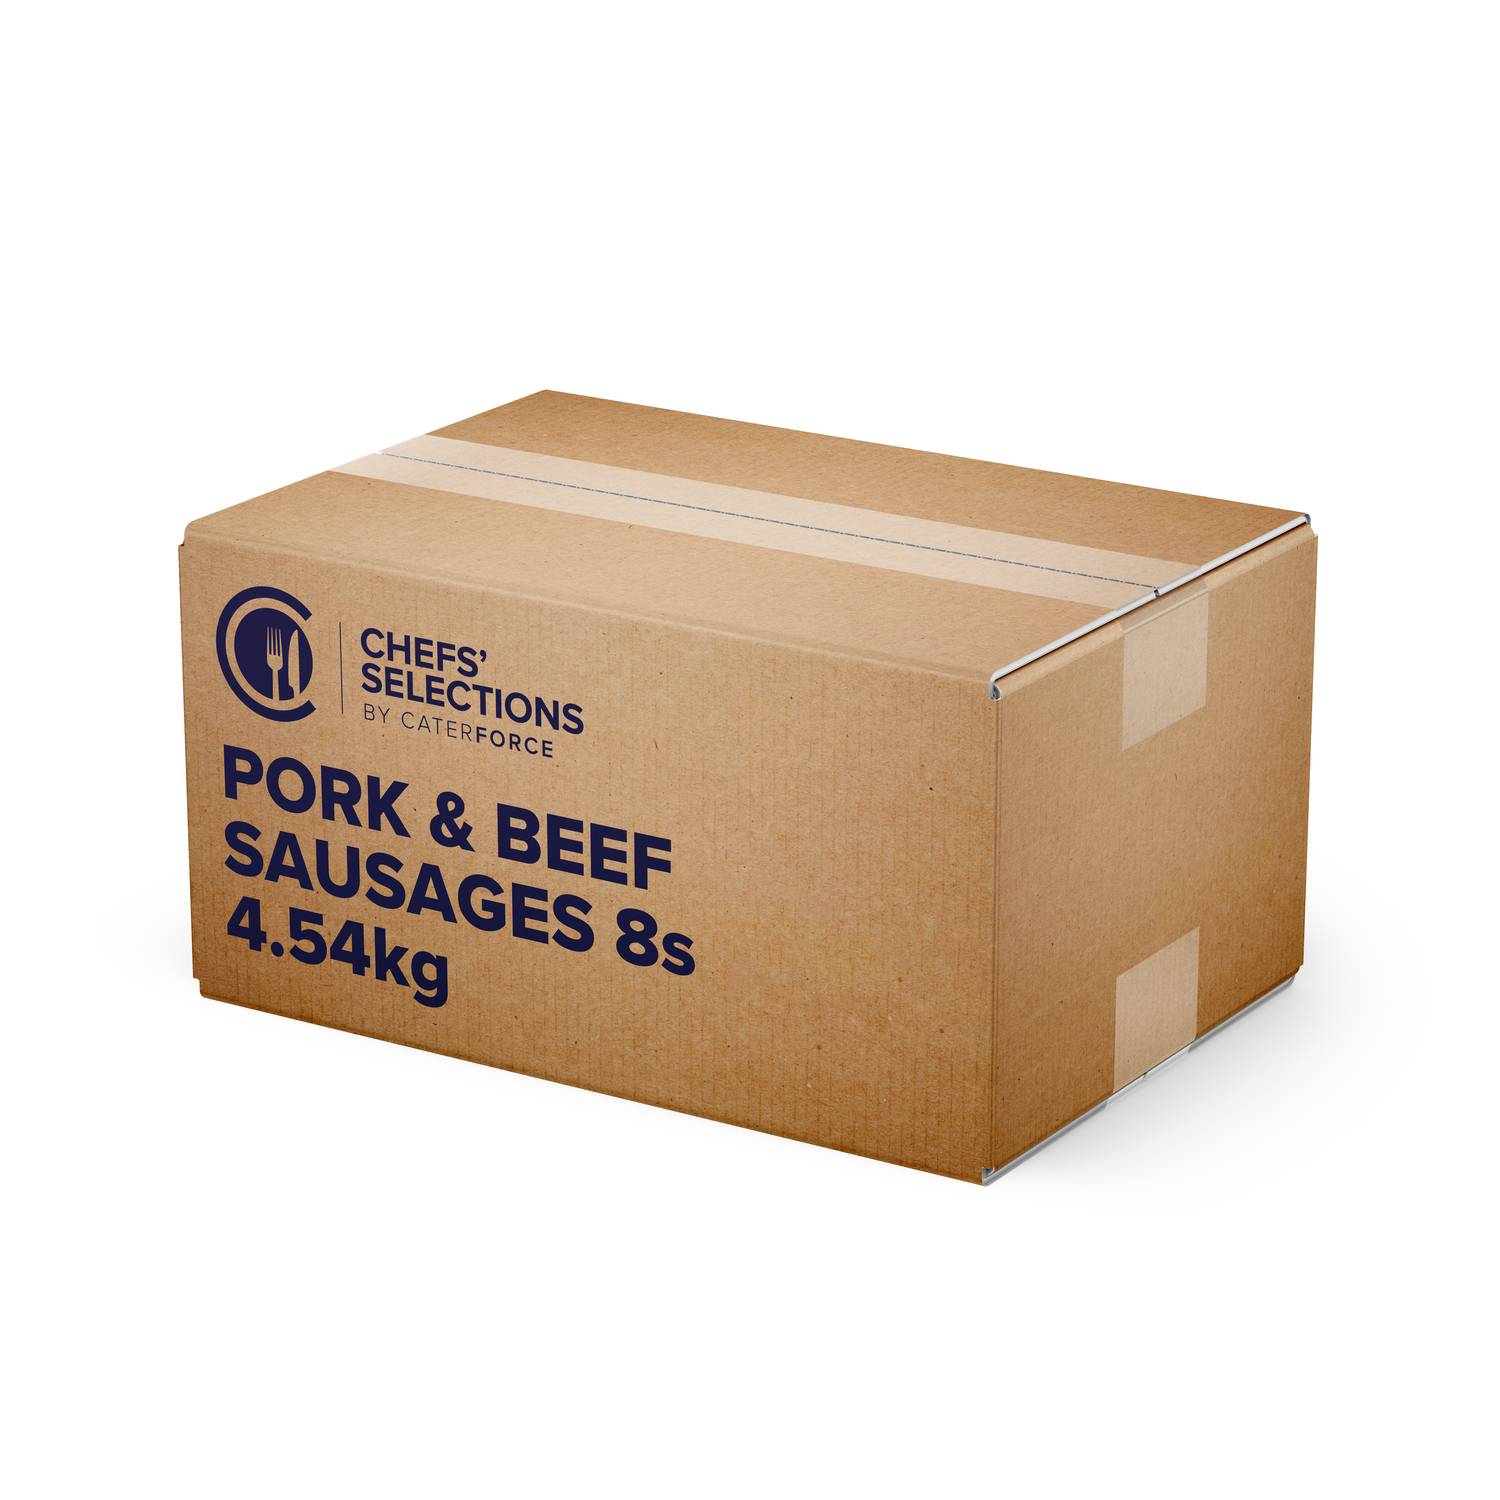 Chefs’ Selections Pork & Beef Sausages 8’s (1 x 4.54kg)